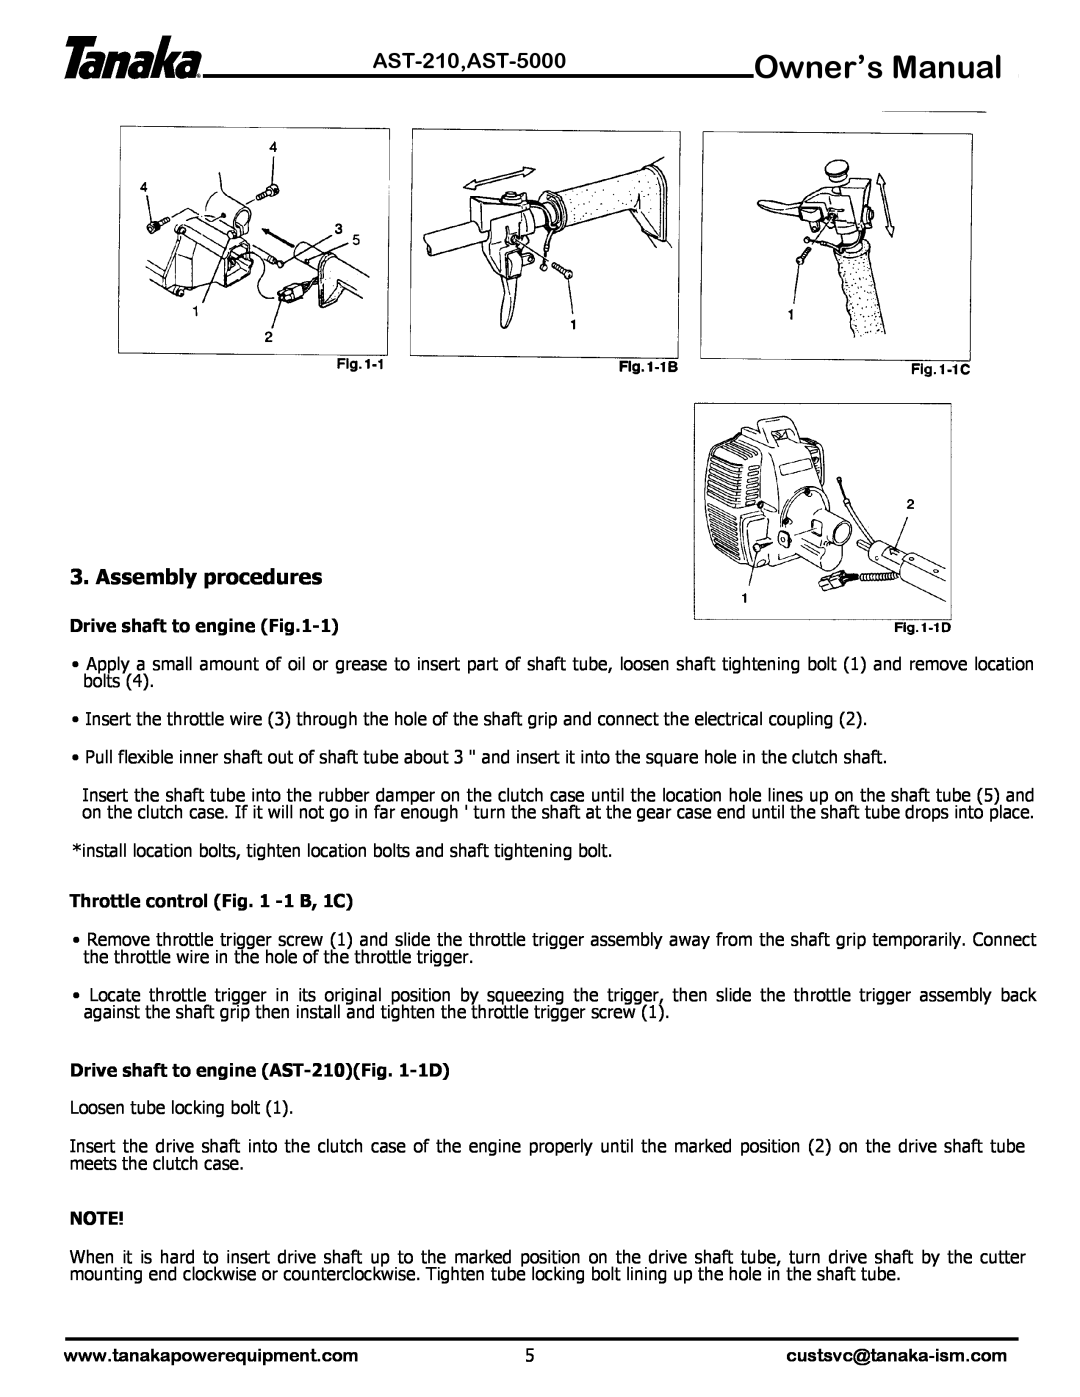 Tanaka manual Assembly procedures, Owner’s Manual, AST-210,AST-5000, Drive shaft to engine -1, Throttle control -1 B, 1C 